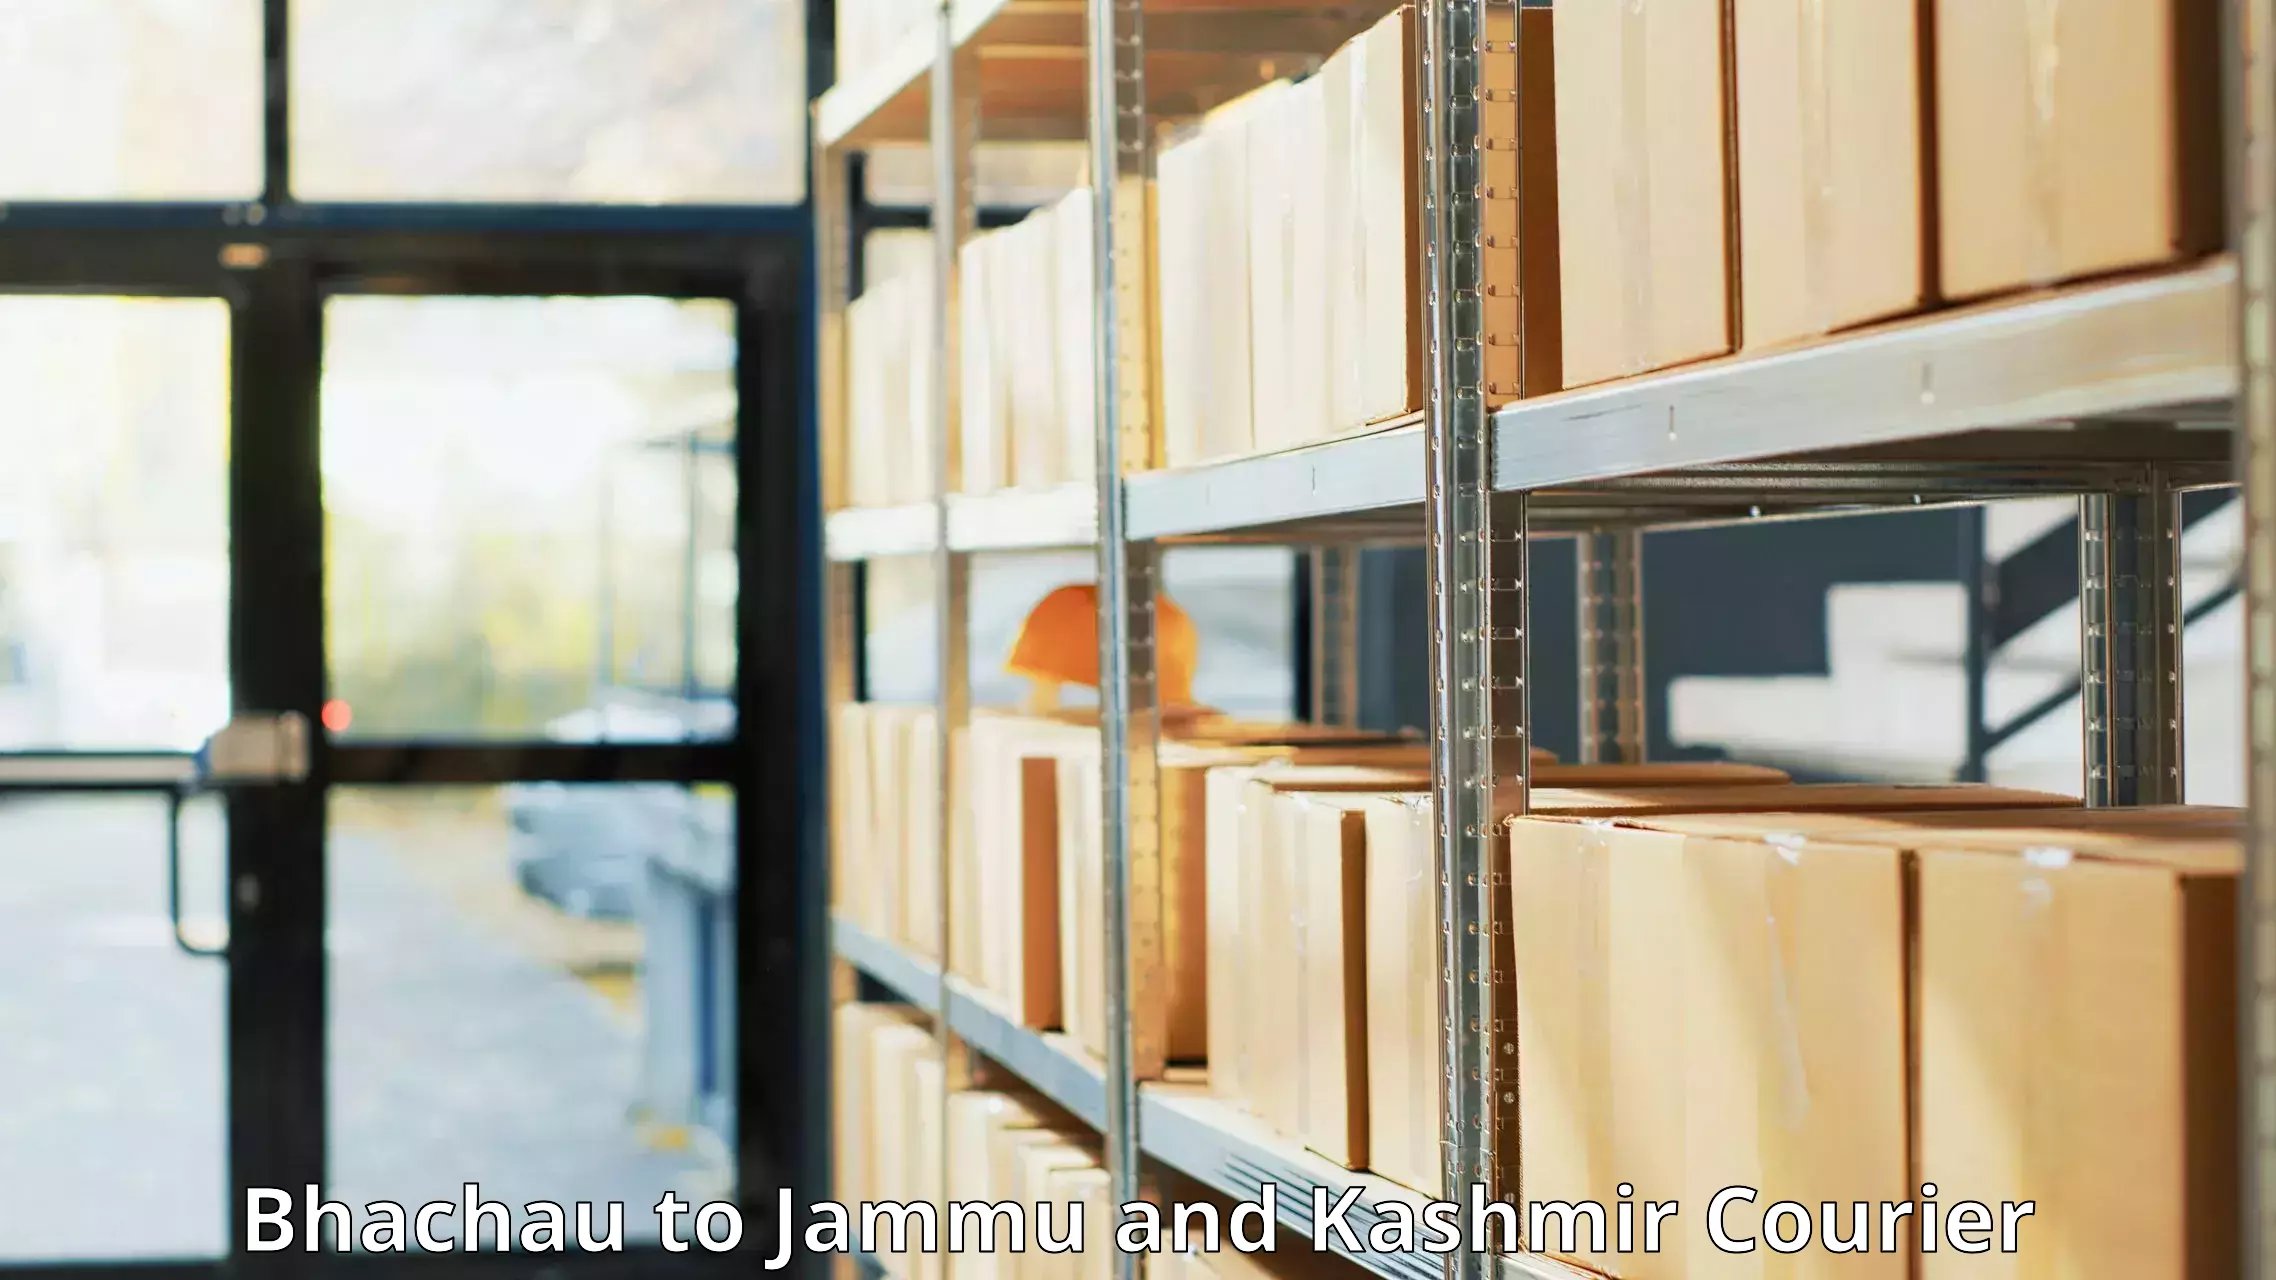 High-priority parcel service Bhachau to Jammu and Kashmir